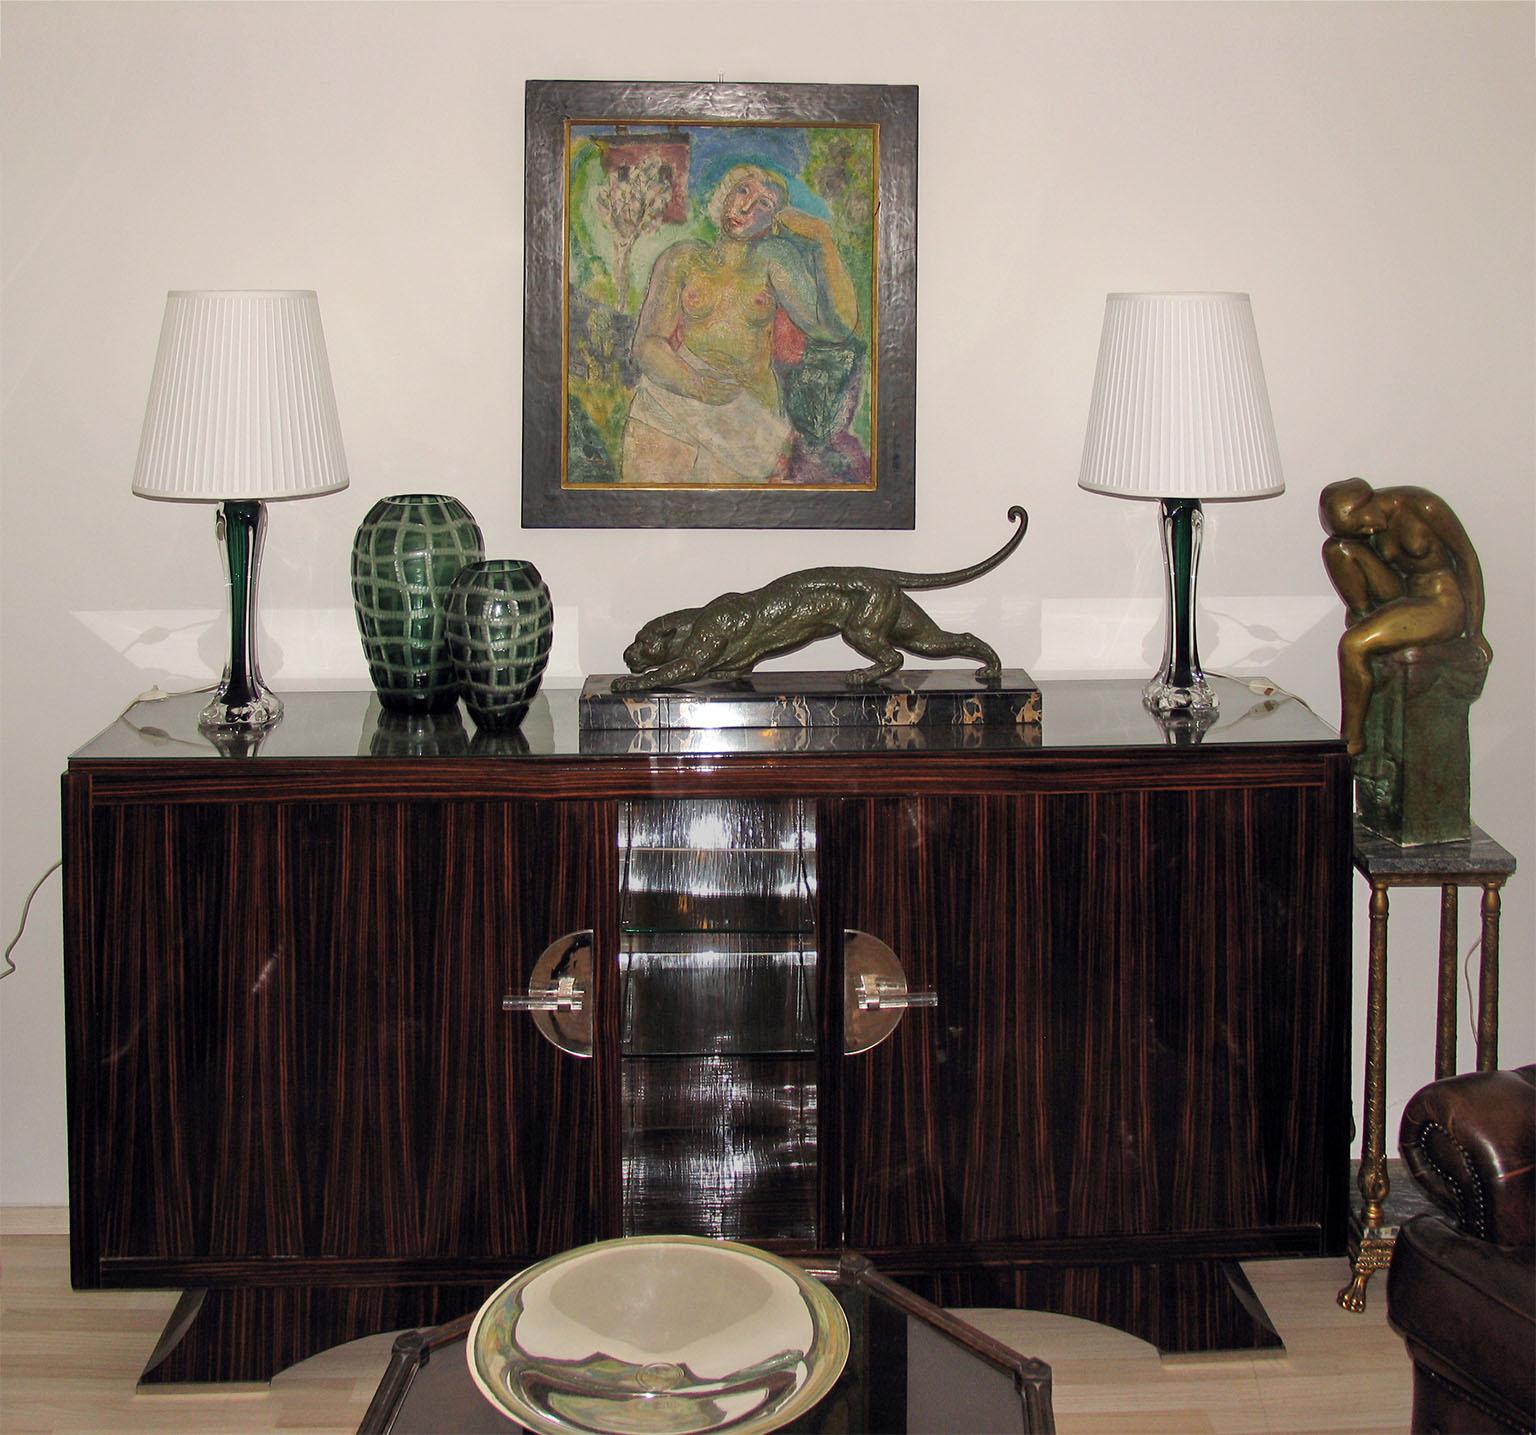 Exceptional Swedish Mid-Century Modern Sommerso pair of table lamps. Designed by Paul Kedelv who was in the early 1950s the chief designer at Swedish Flygsfors'. Deep forest green crystal encased in clear crystal with squared base. Marked to the